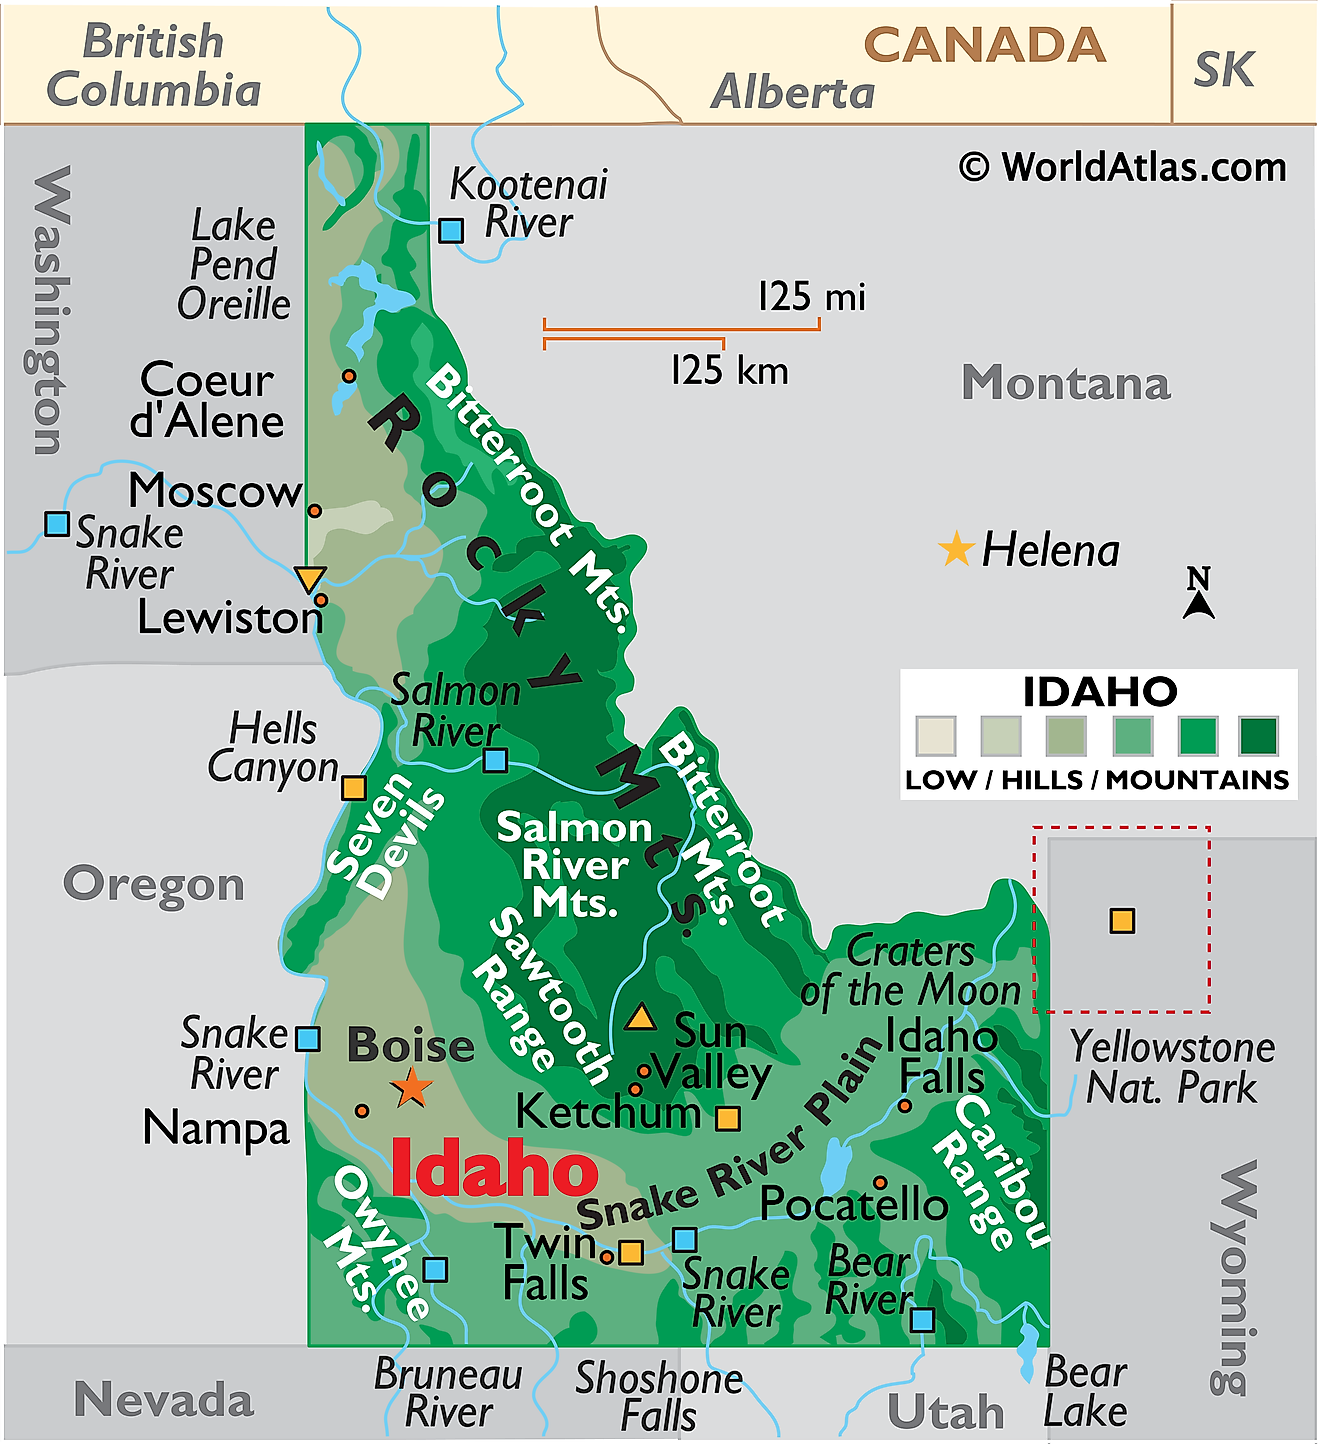 It shows the physical features of Idaho including its mountain ranges and m...